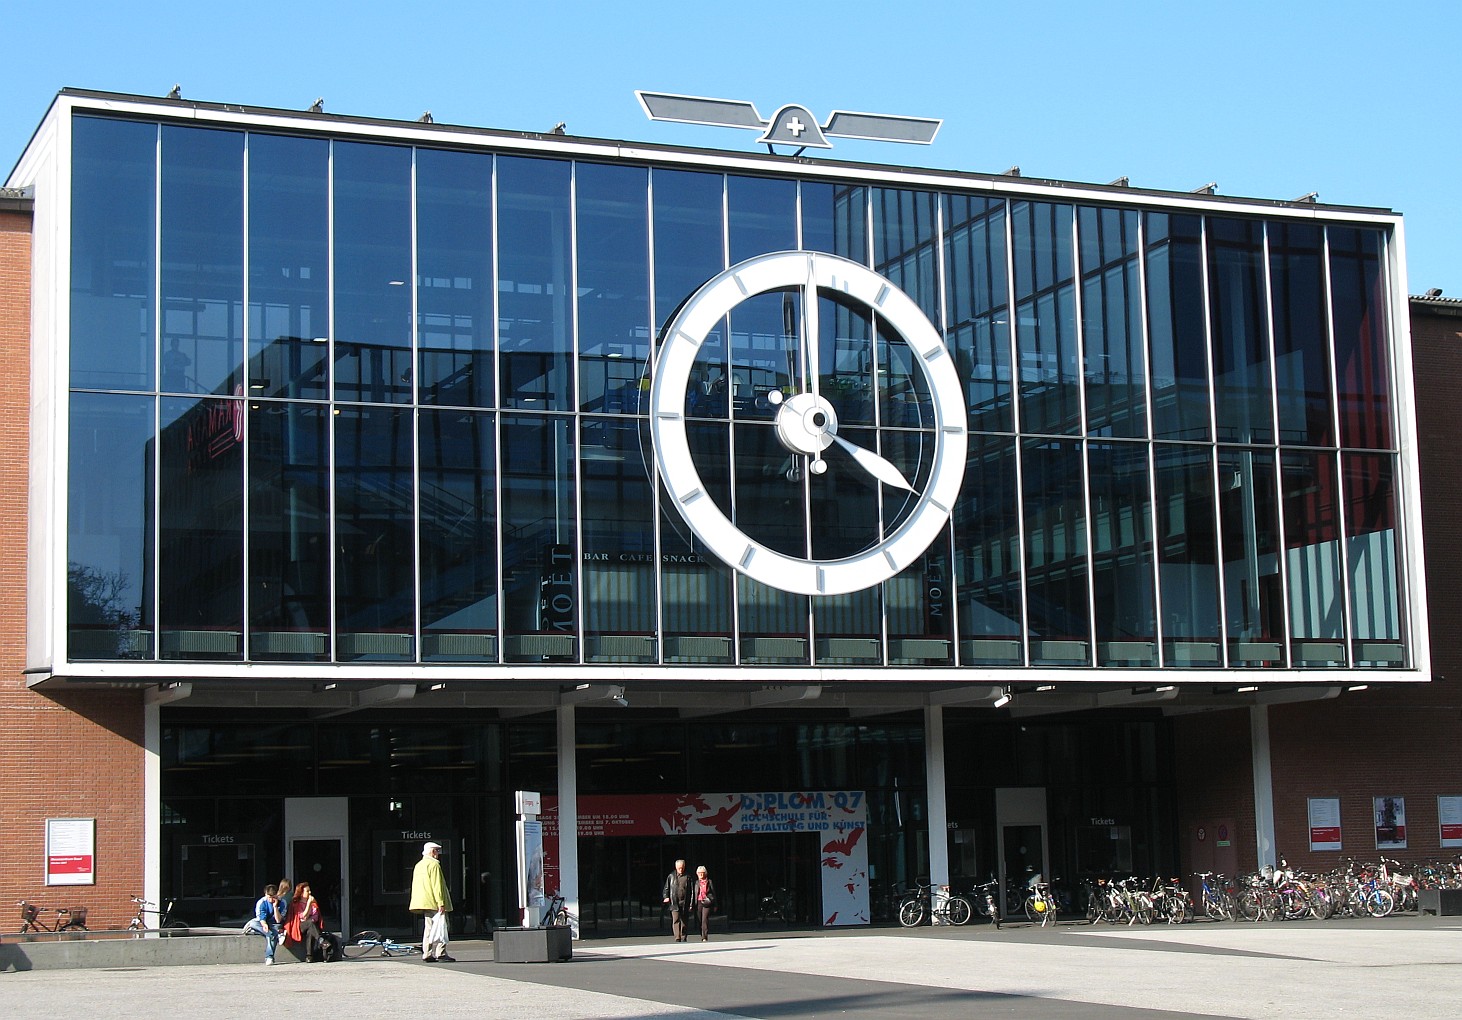 Front view of hall 2 of Messezentrum Basel, in Basel, Switzerland.